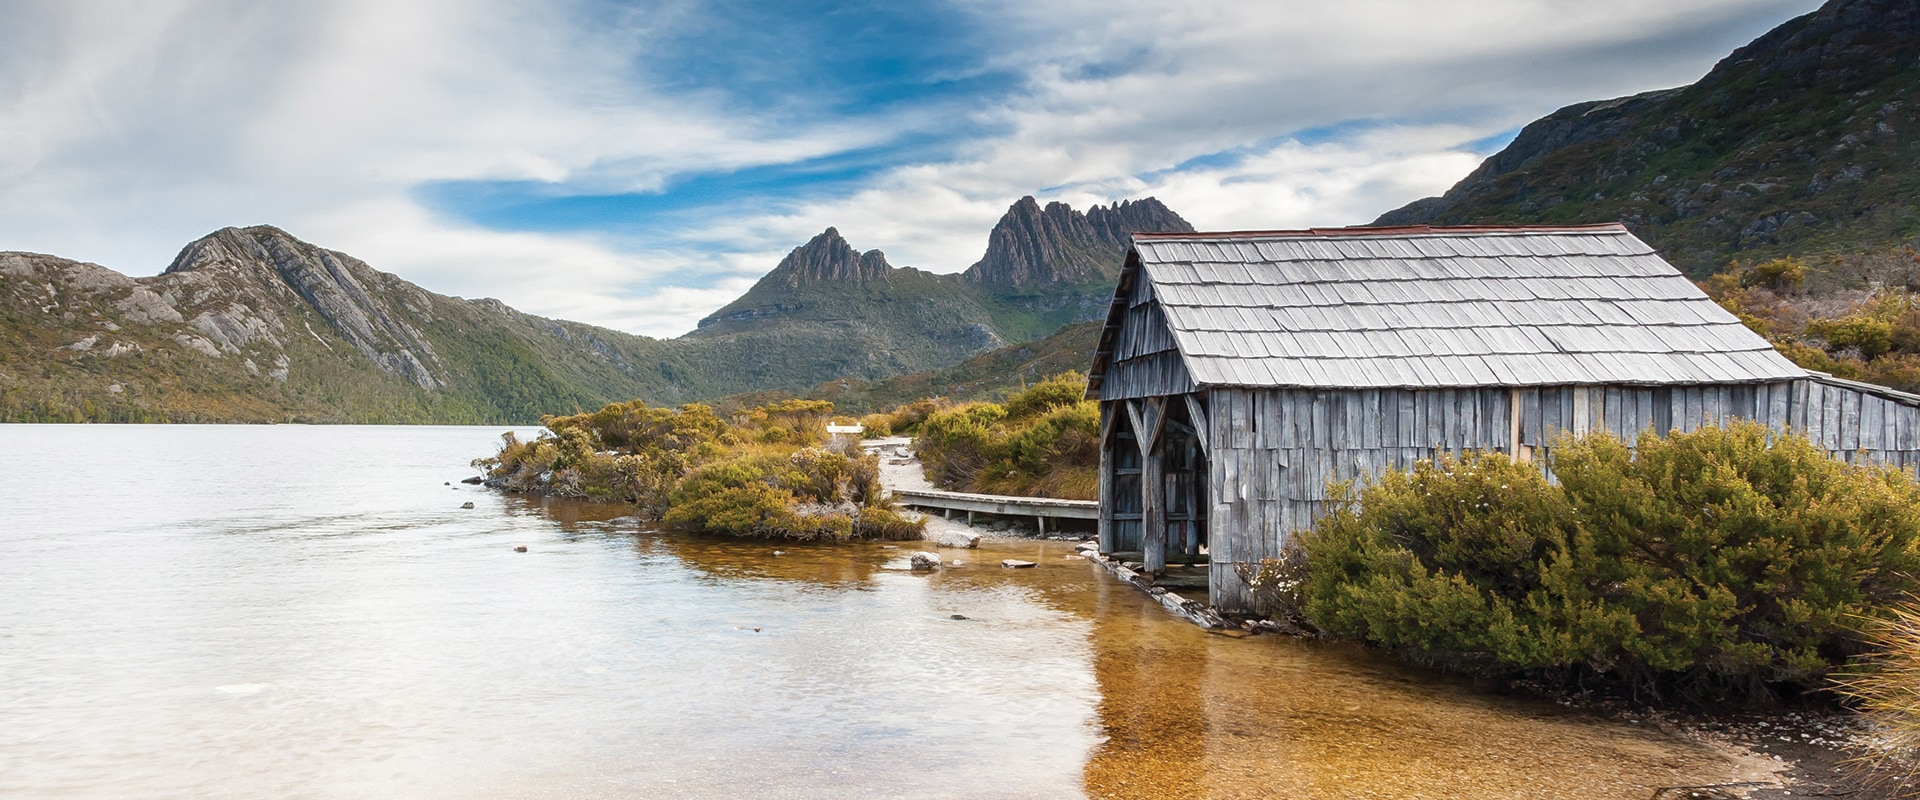 A remote wilderness area with lake and small timber shed, Tasmania